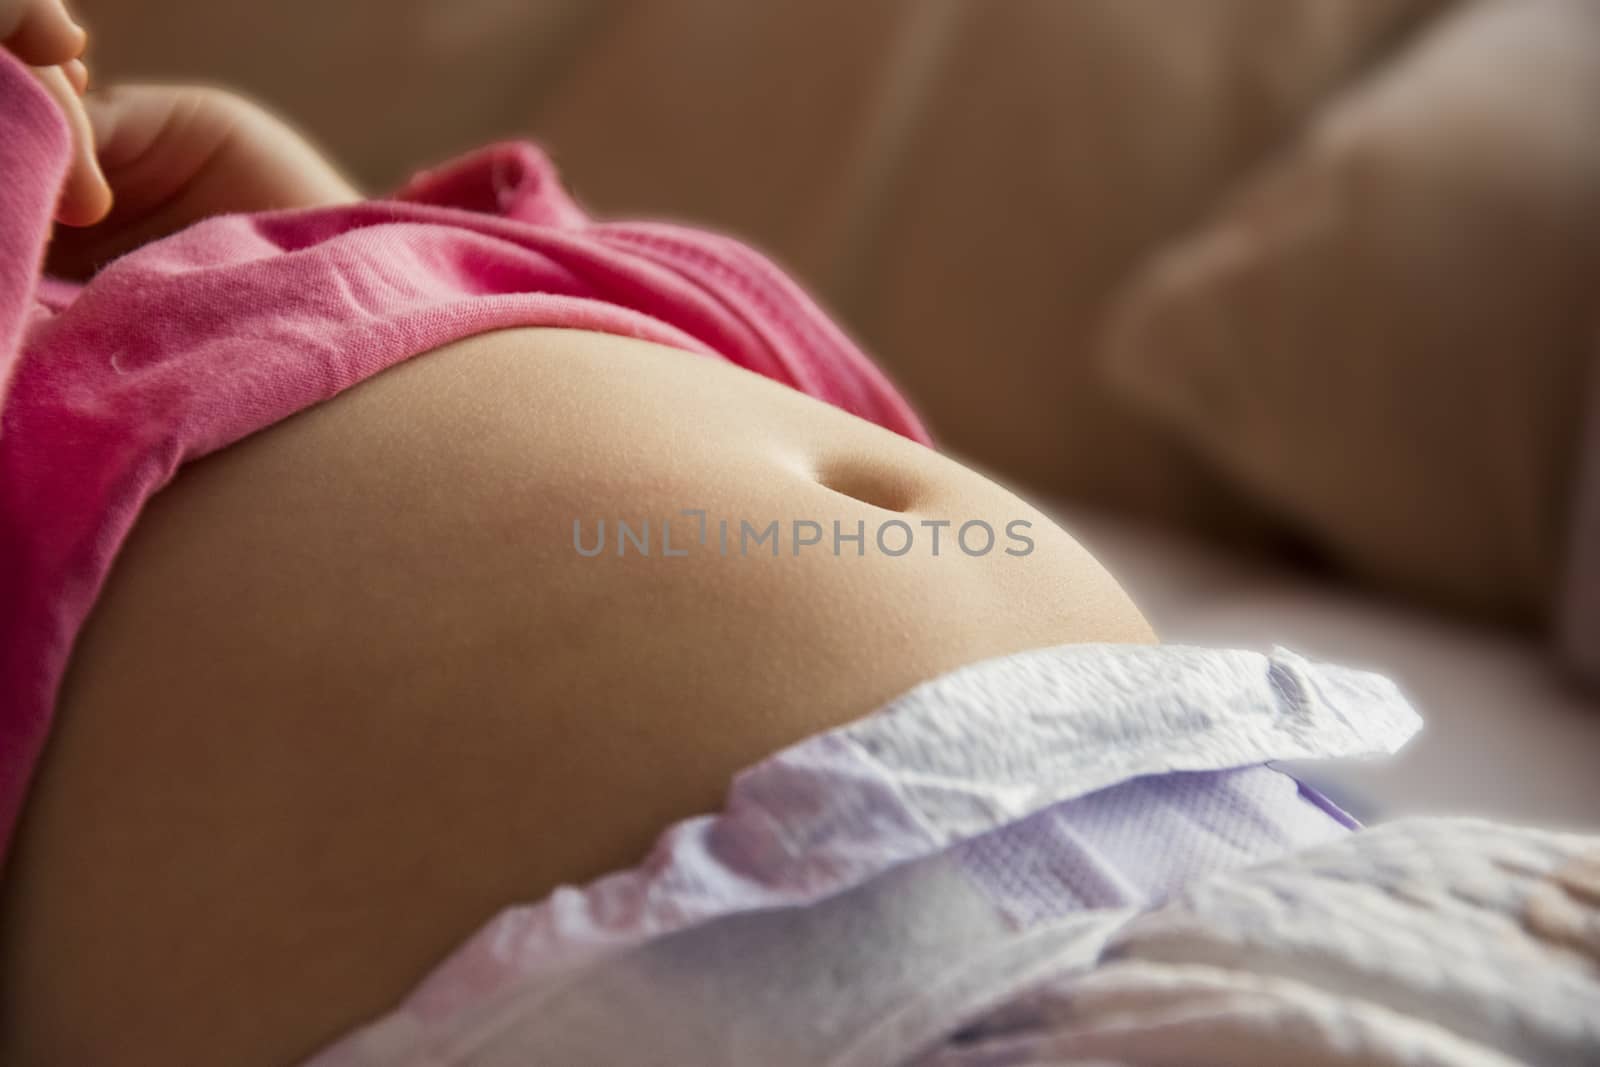 belly, tummy of a small child close up photo. young skin with a visible navel